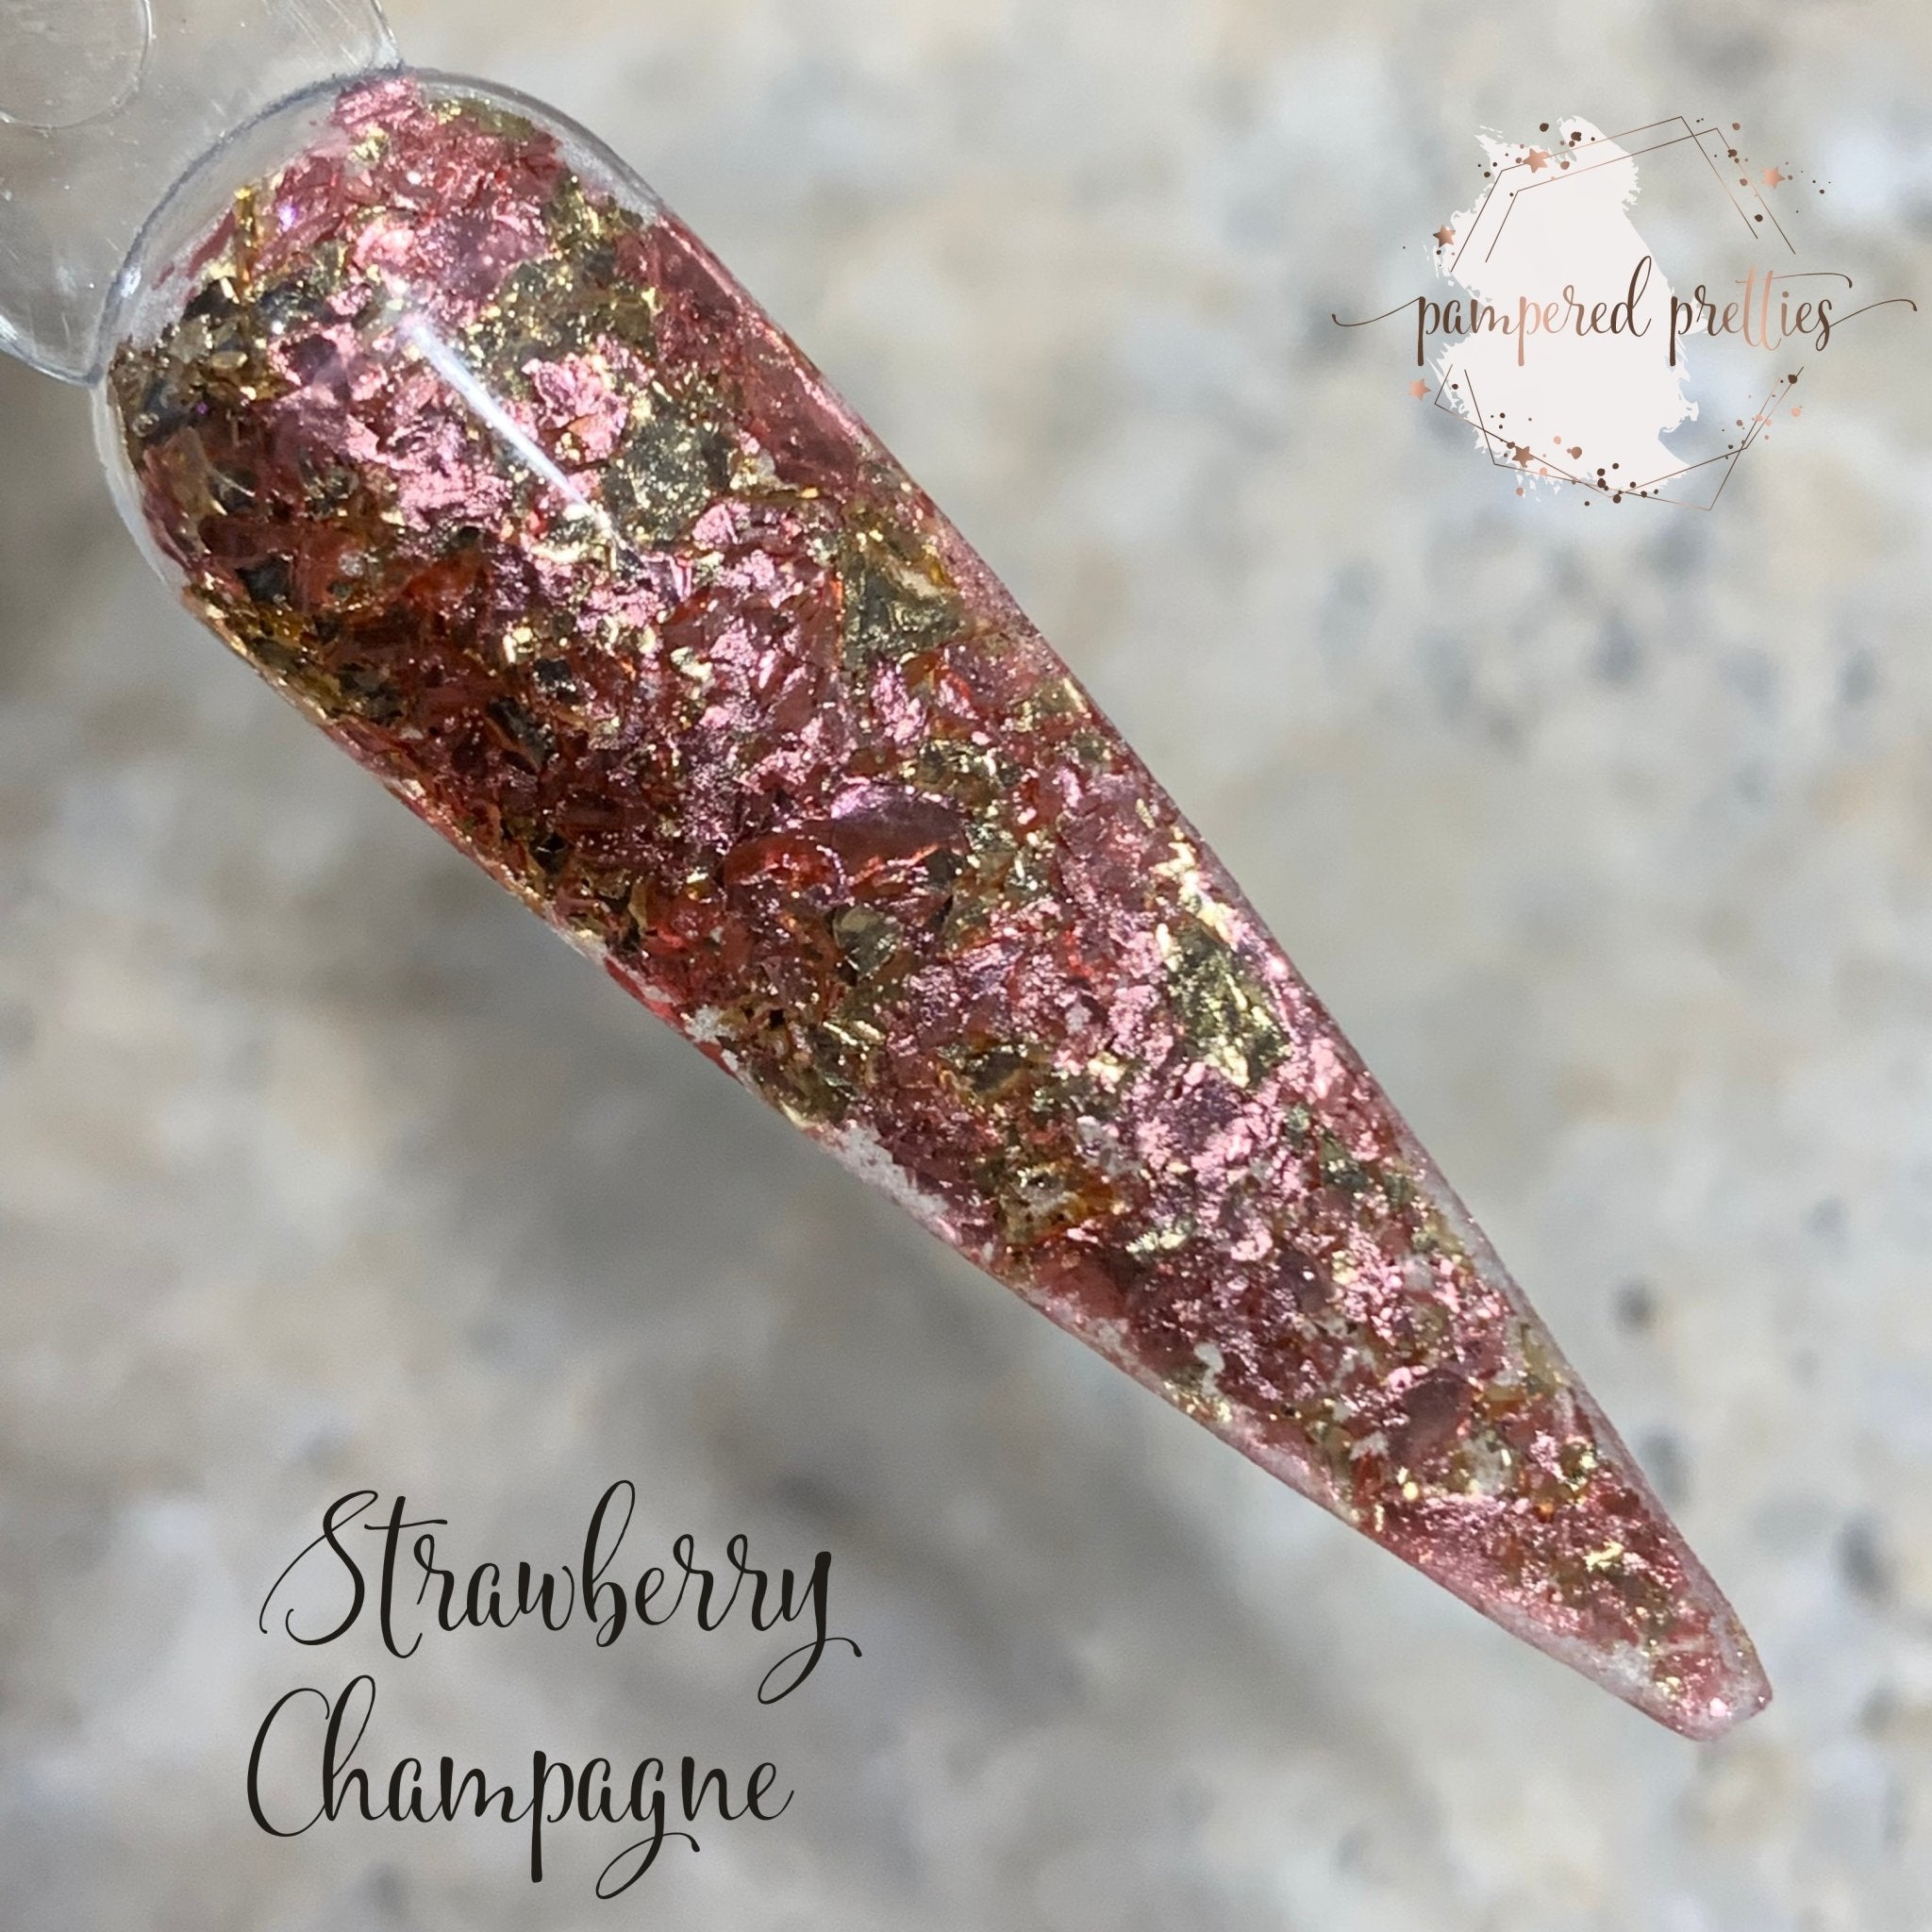 Strawberry Champagne - Pampered Pretties